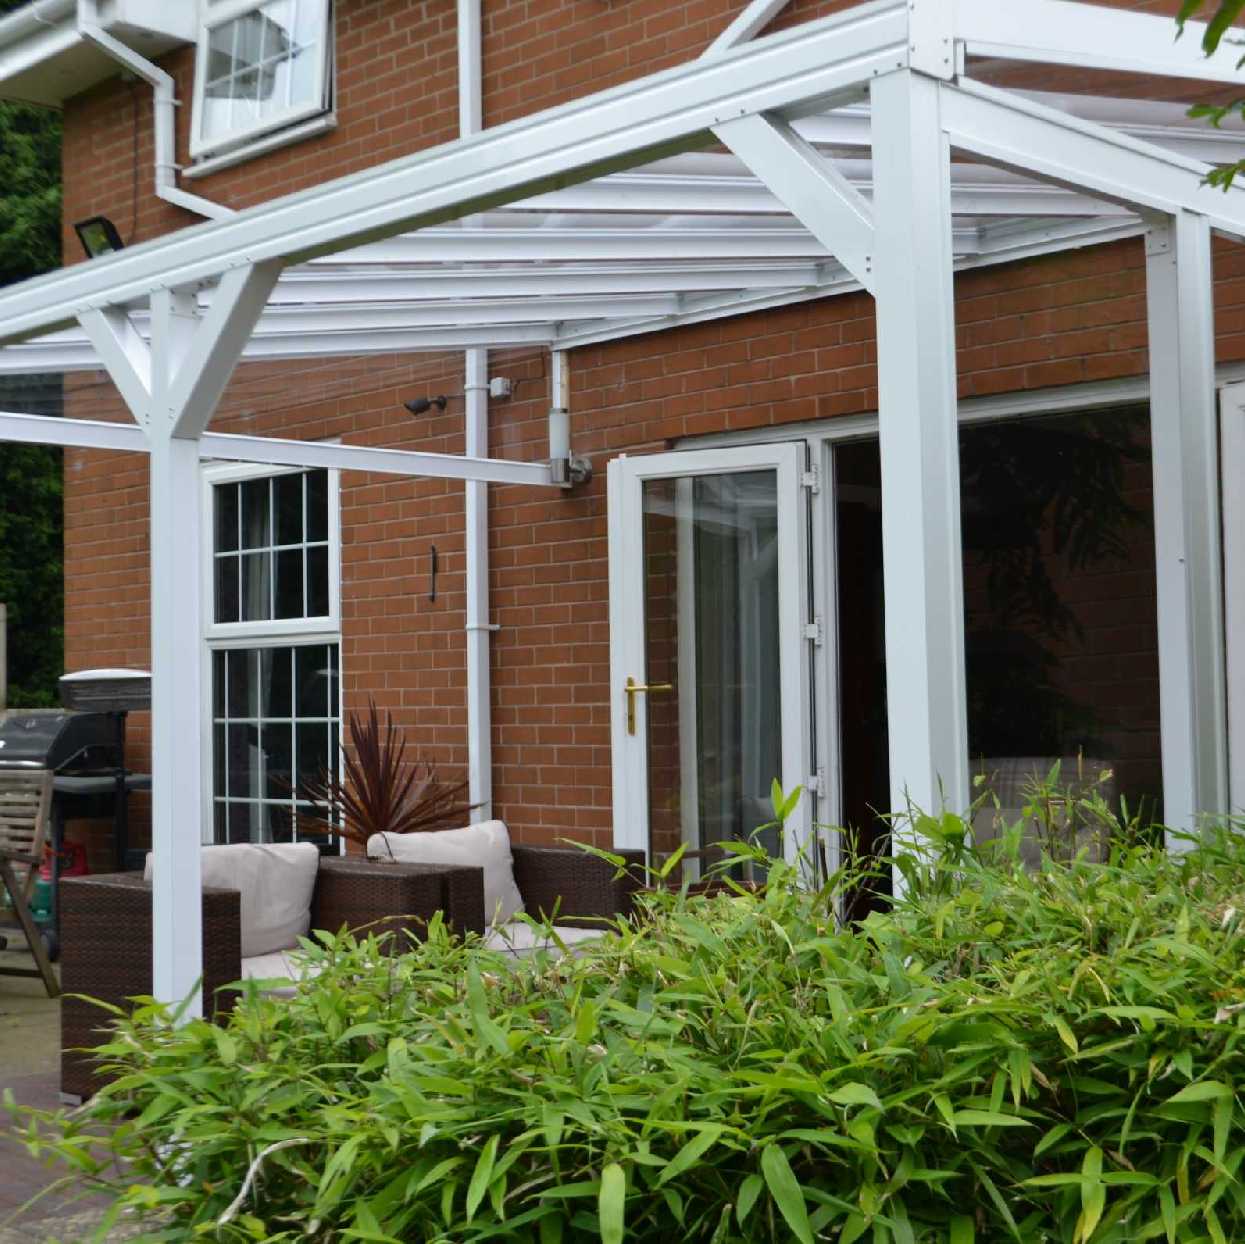 Omega Smart Lean-To Canopy, White UNGLAZED for 6mm Glazing - 2.8m (W) x 2.5m (P), (2) Supporting Posts from Omega Build